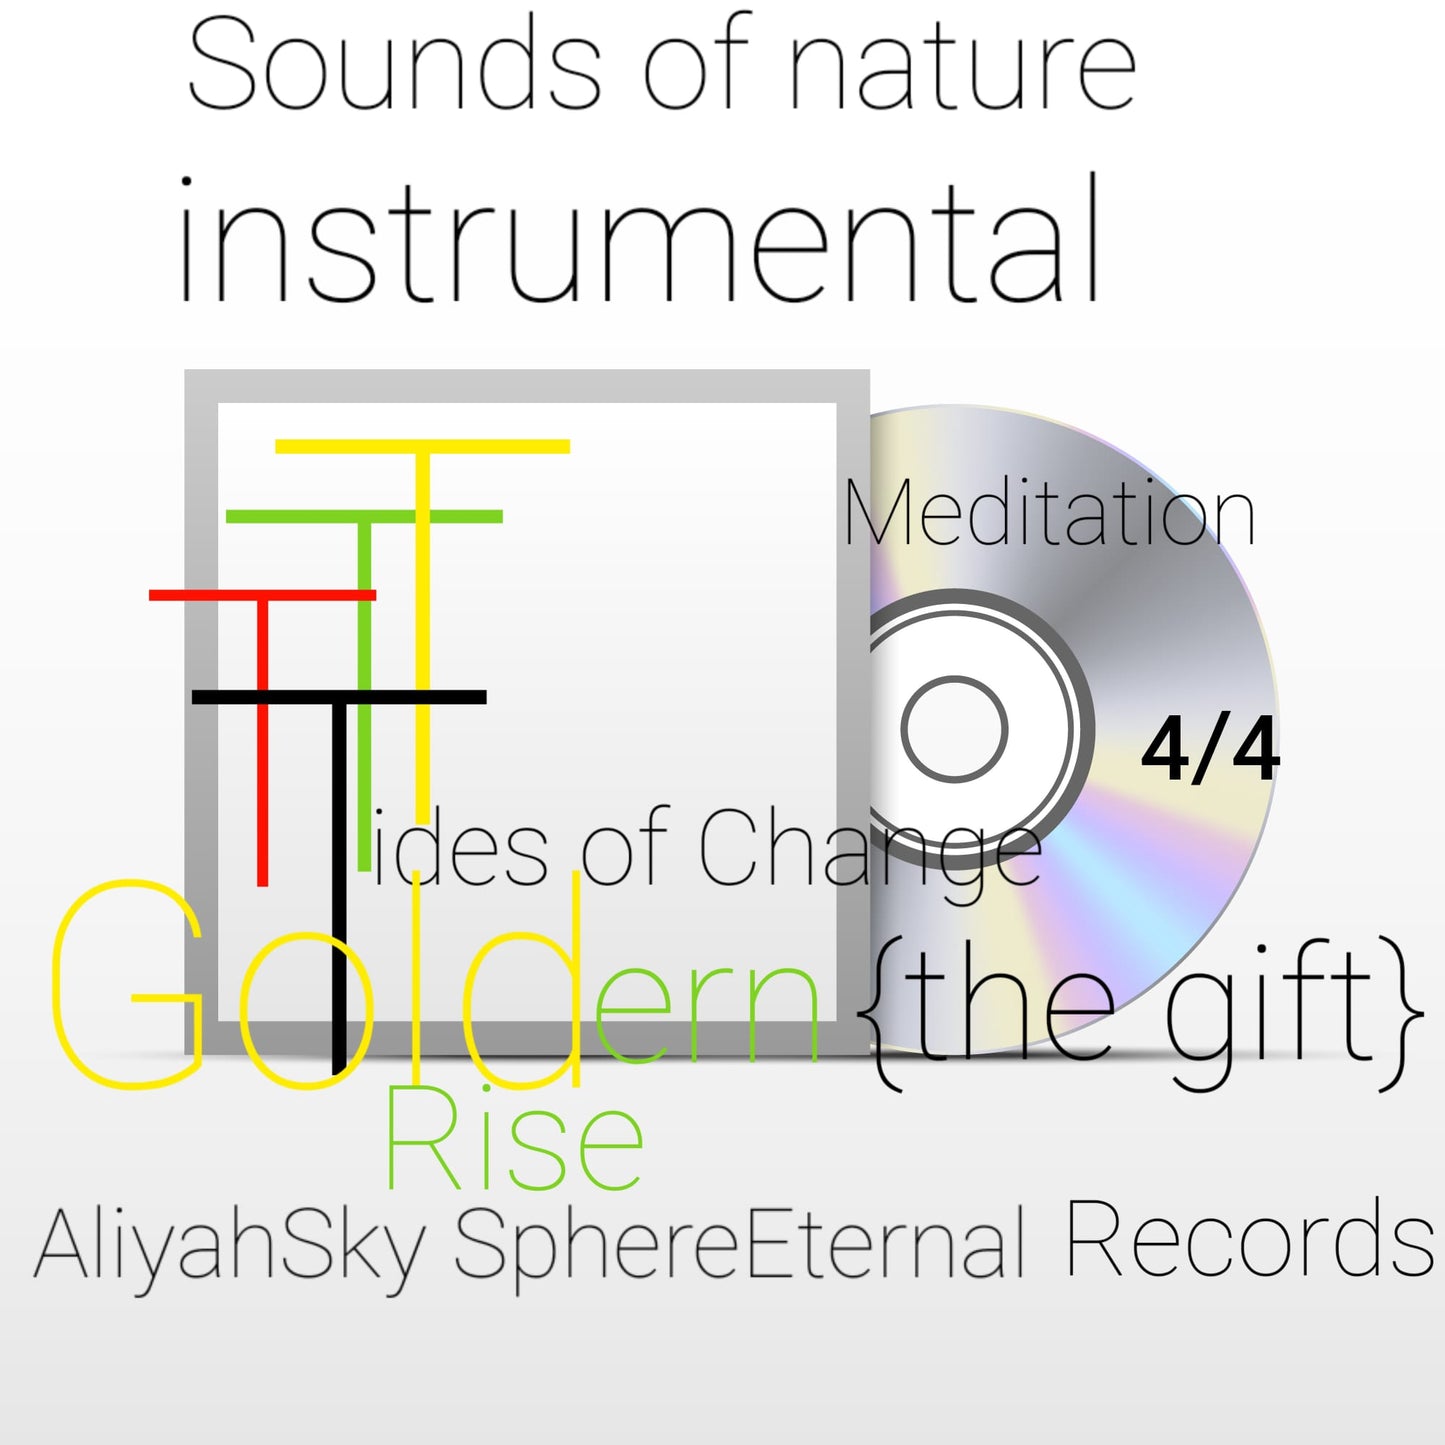 Sounds Of Nature Instrumental Tides Of Change{the gift} Goldern rise 4/4